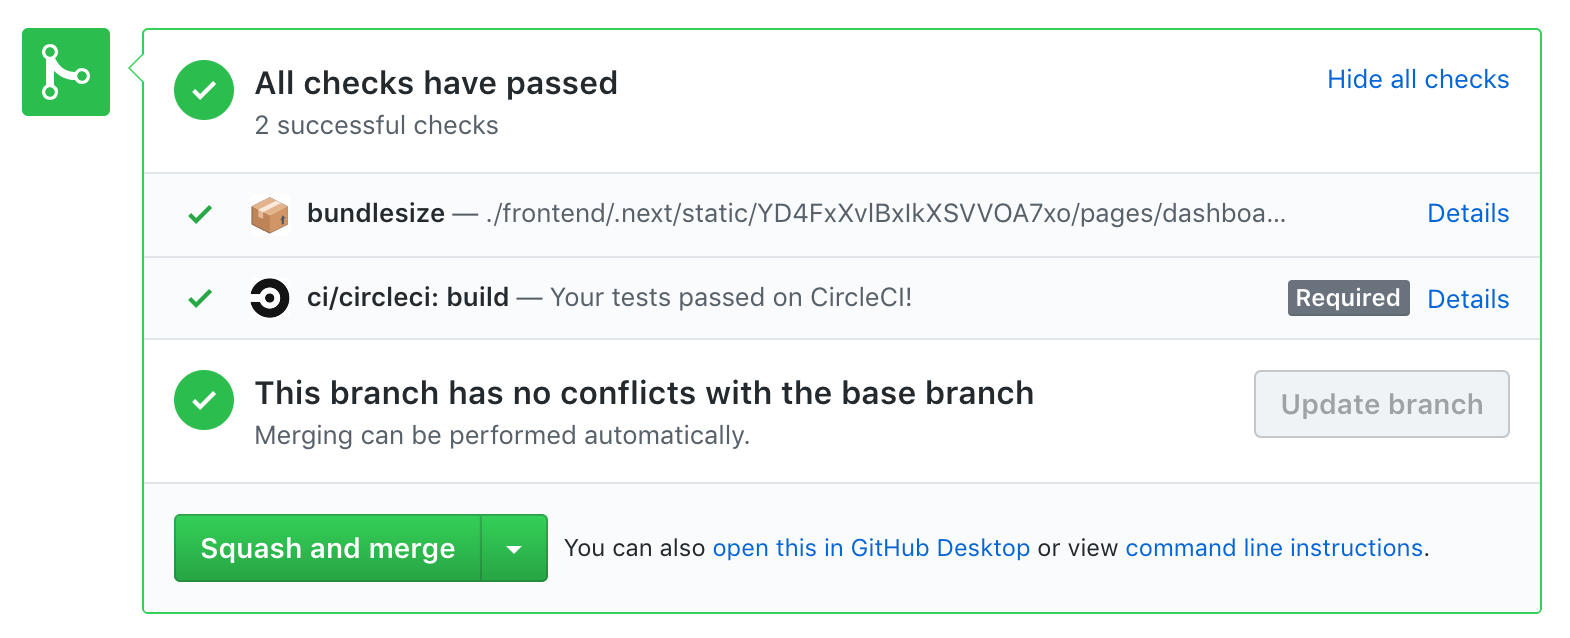 After tree shaking, result on github PR check